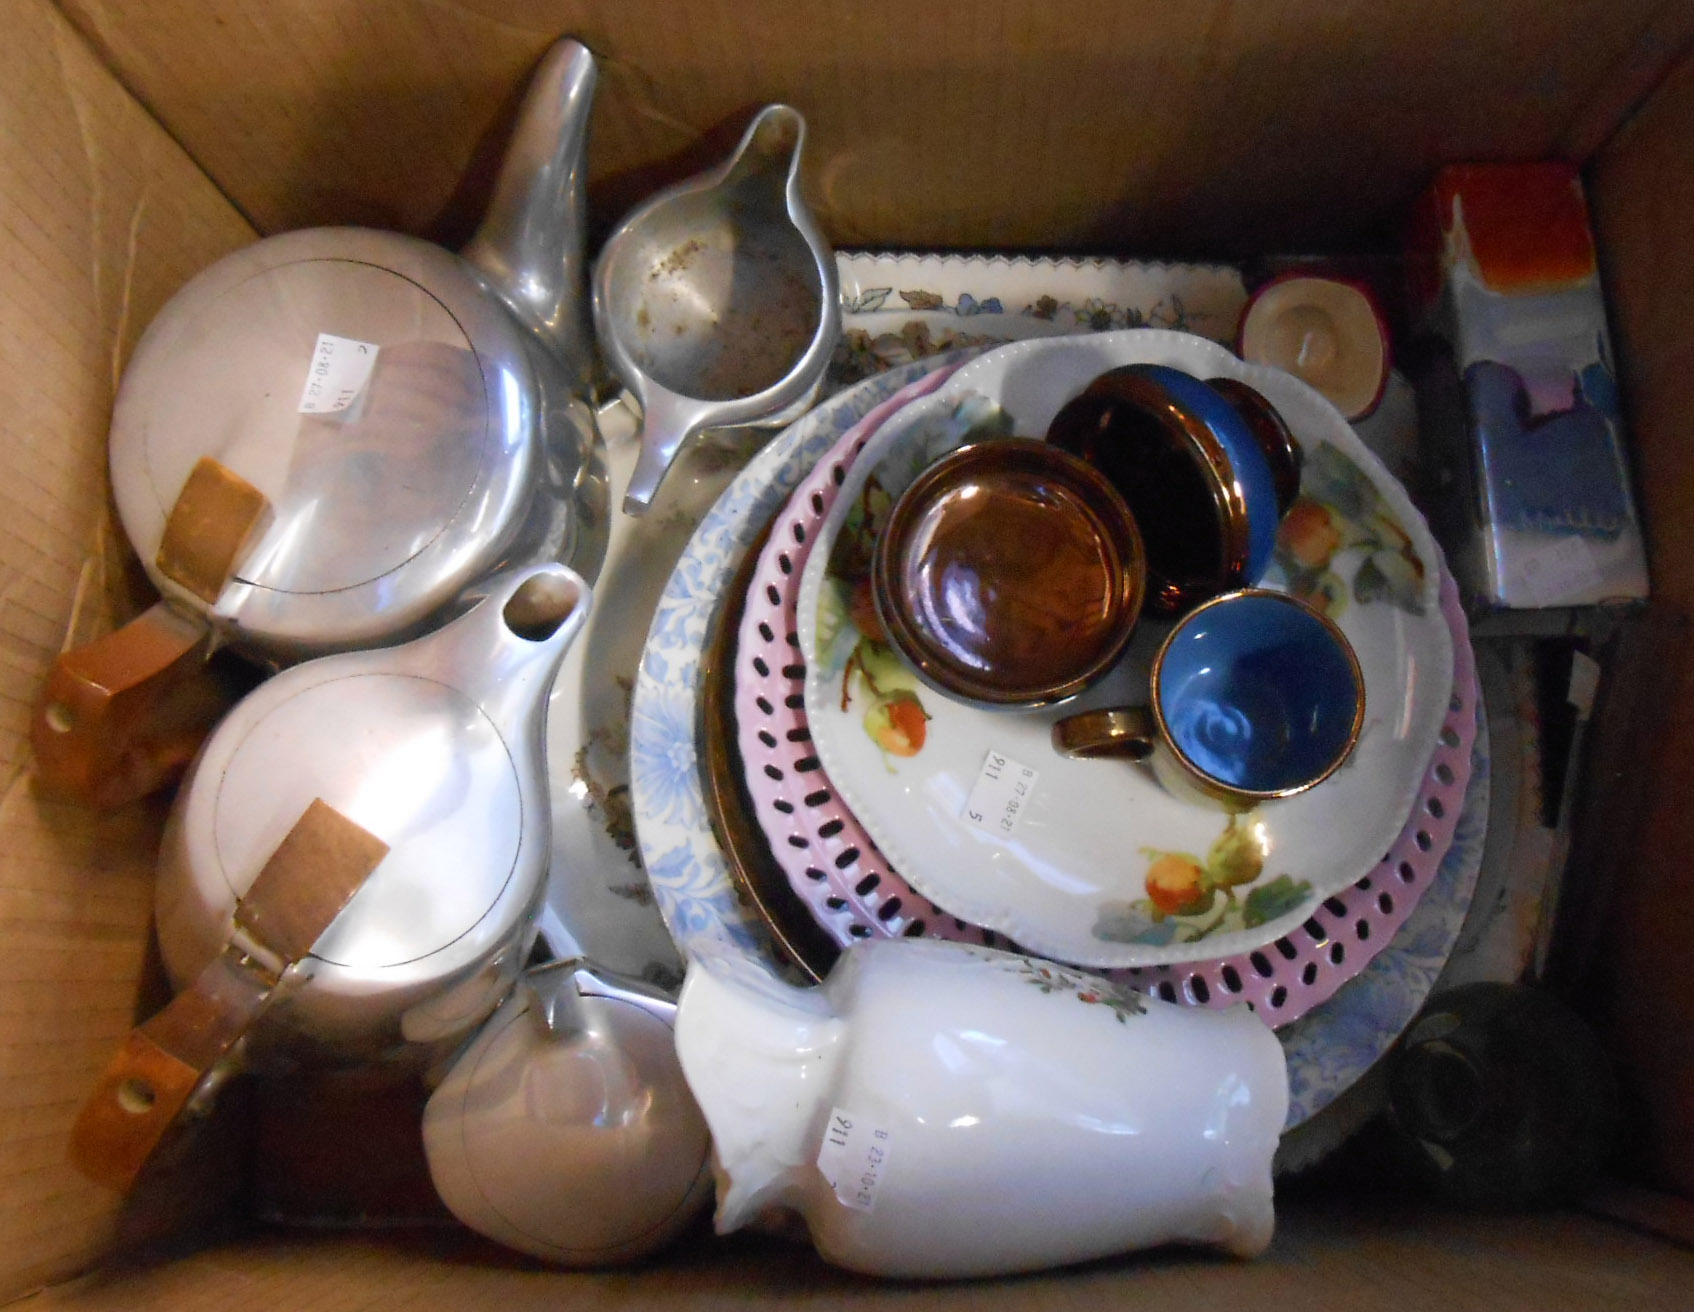 A box containing a quantity of ceramic and glass items including Doulton miniature character jug,